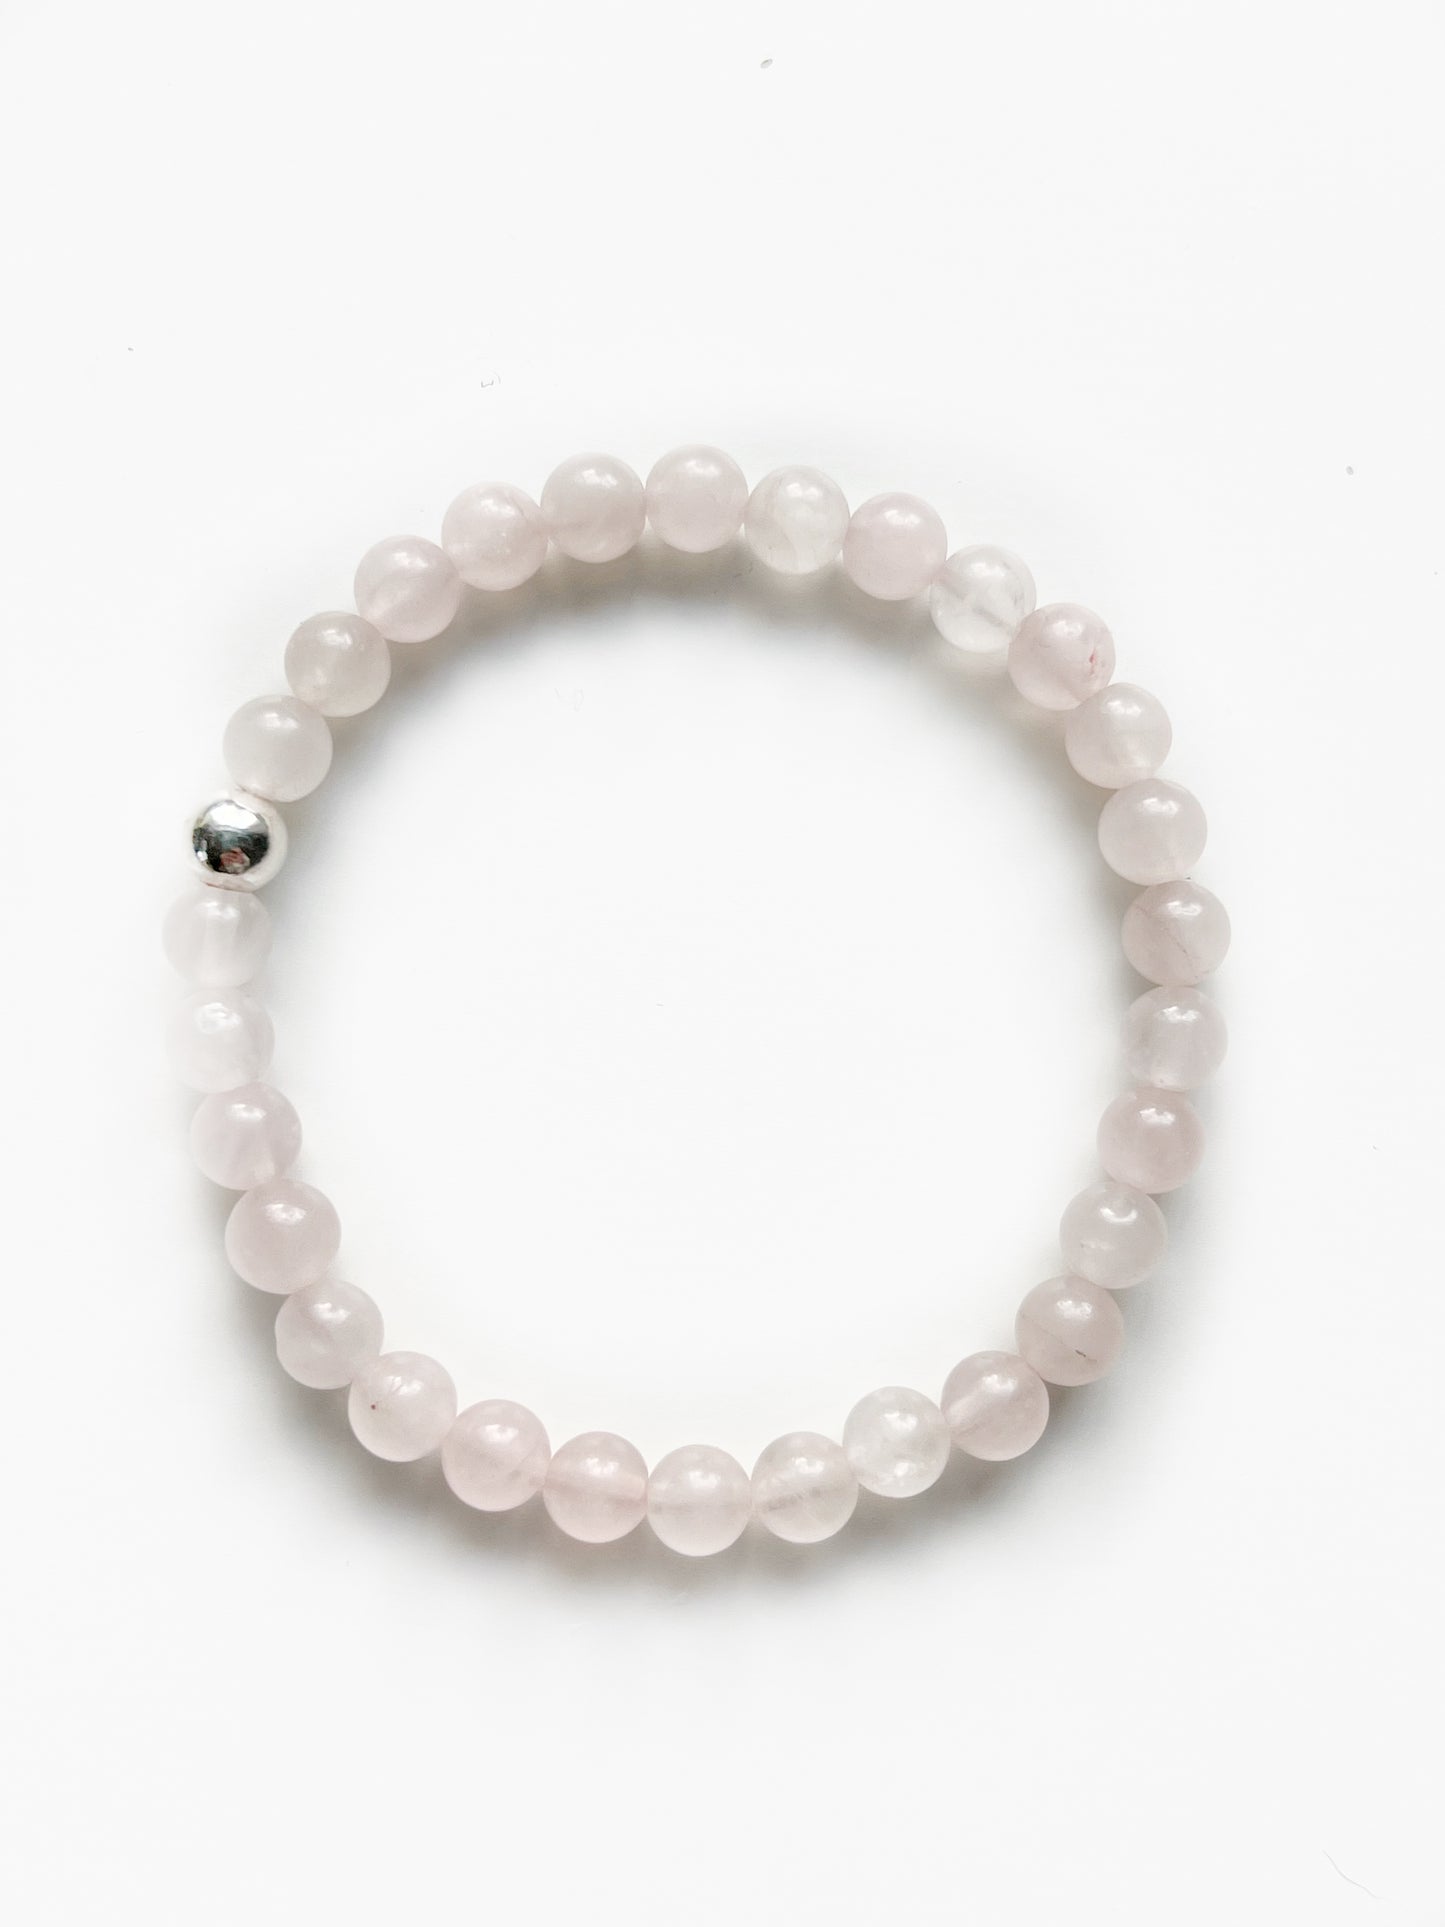 Rose Quartz stretch bracelet with one silver bead on a white background.